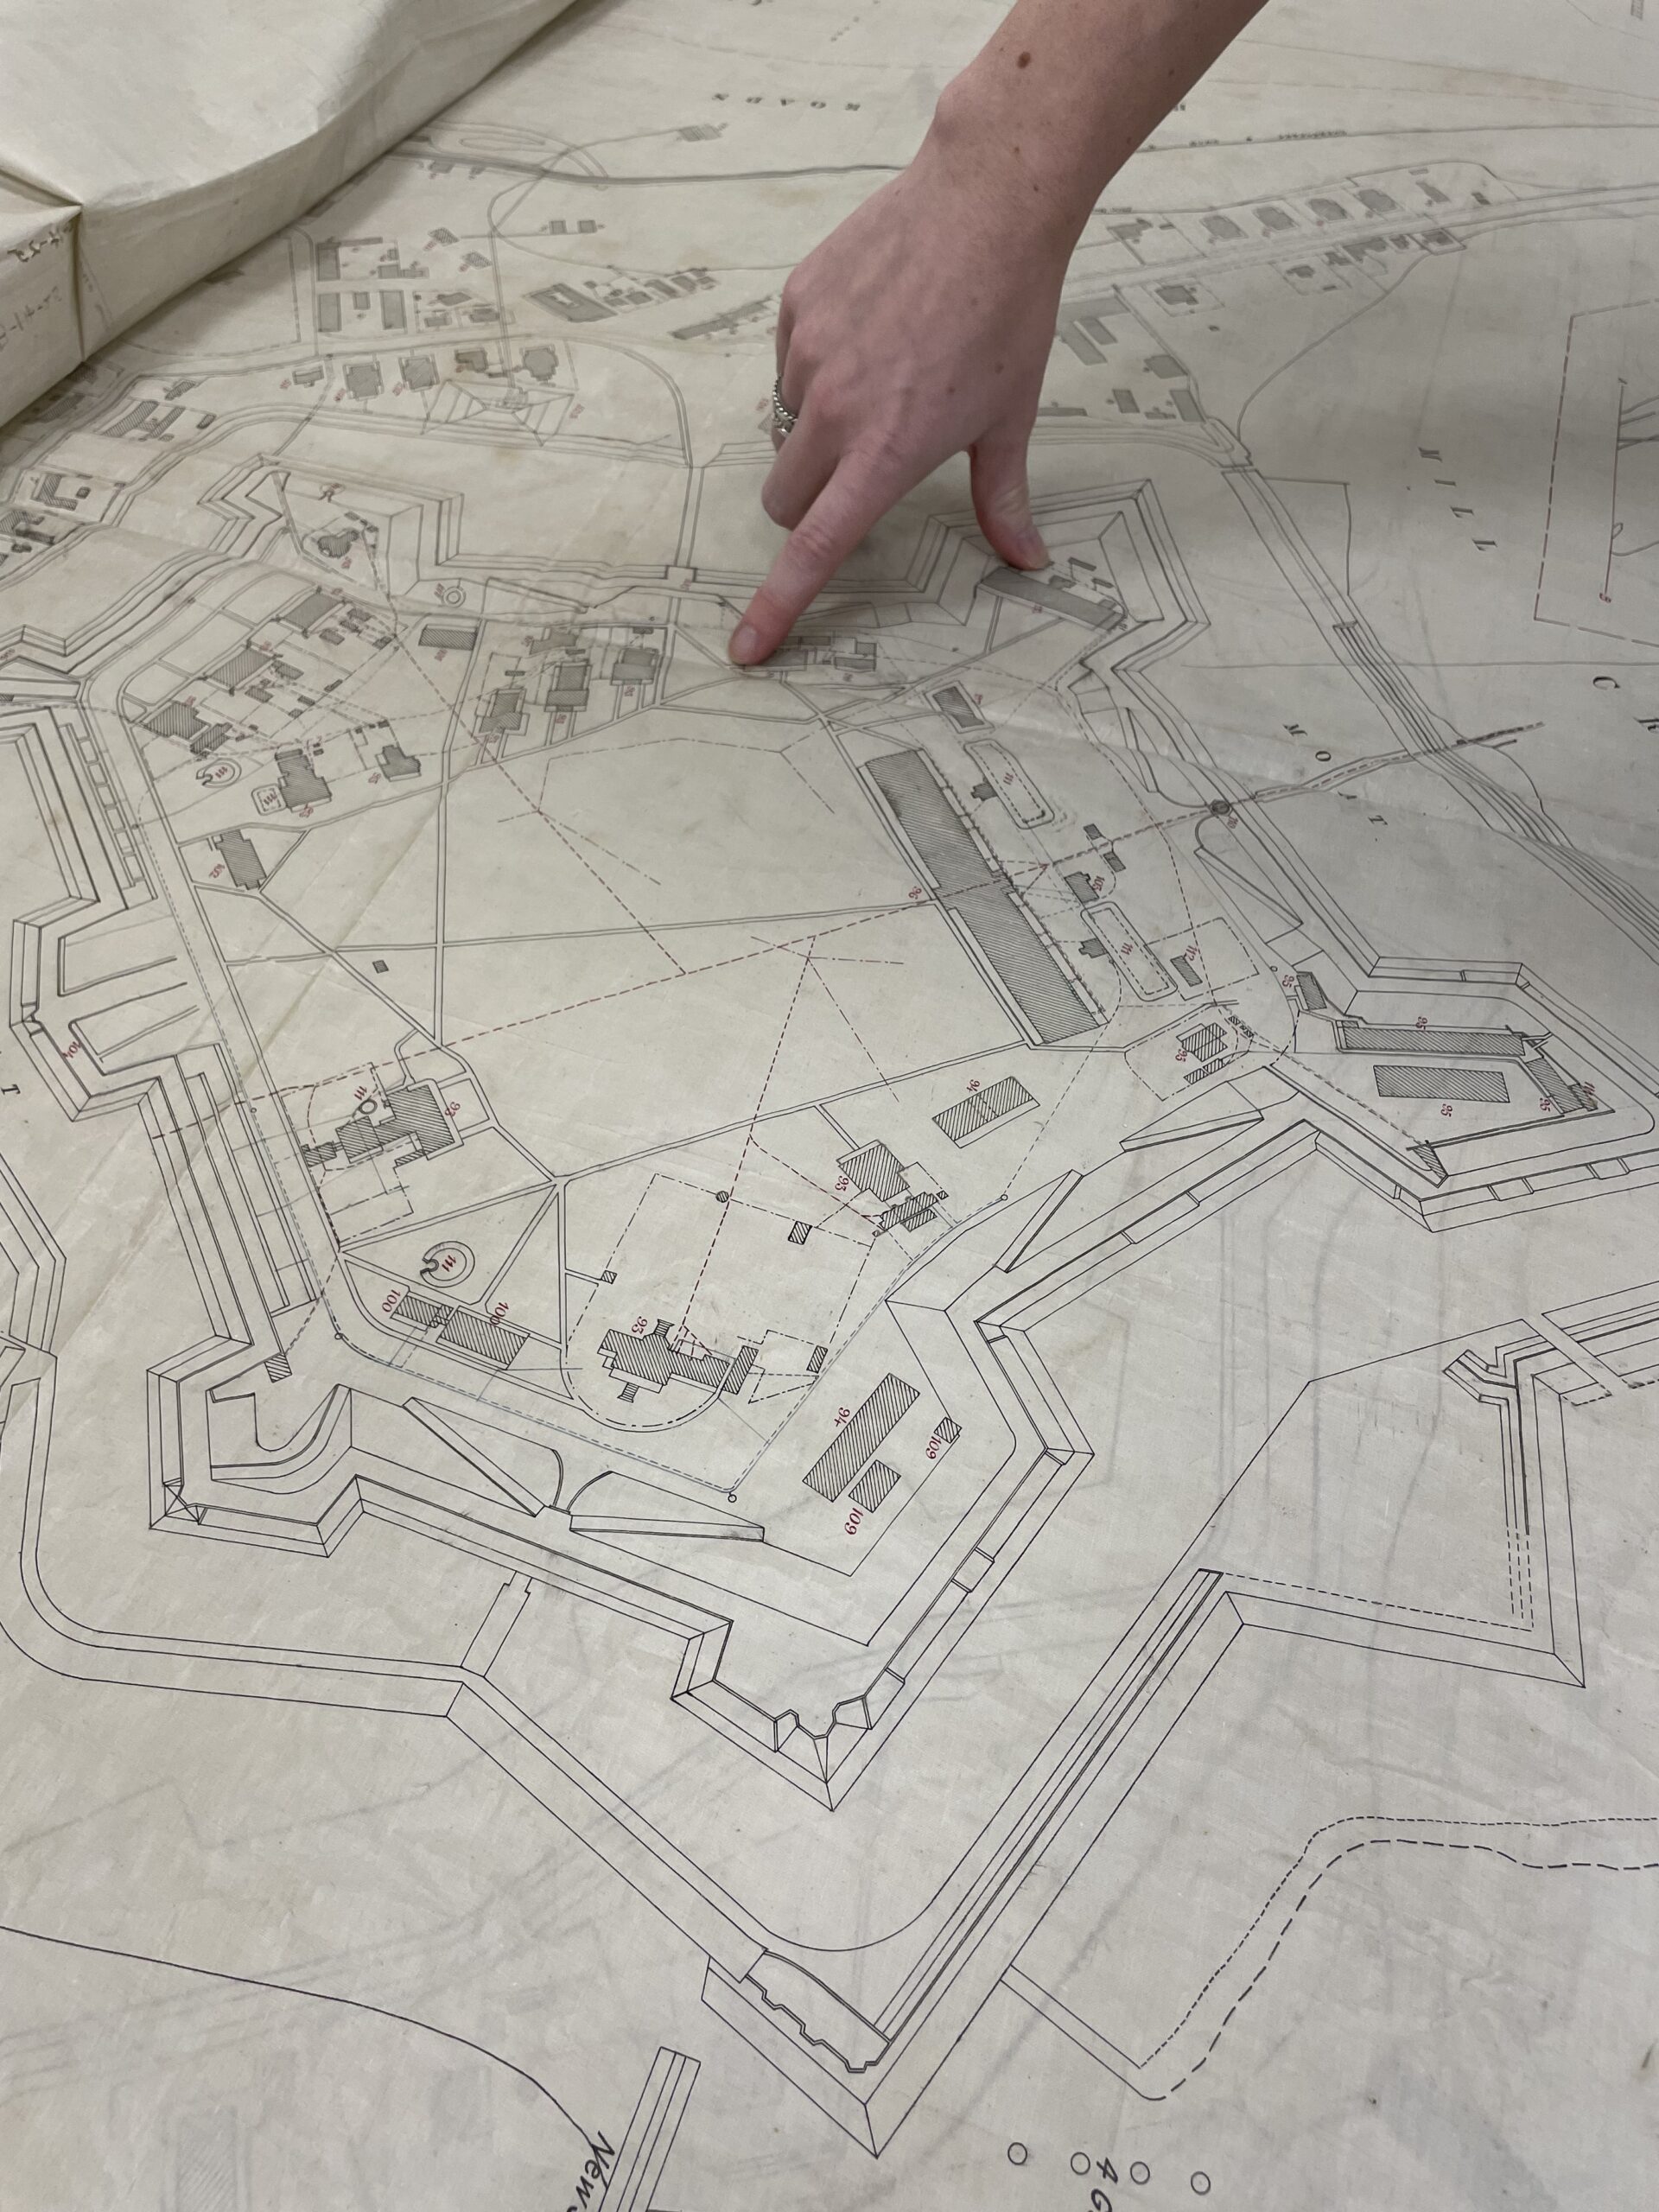 On a map of Fort Monroe during the time of Reconstruction after the Civil War, Fort Monroe archivist Ali Kolleda points out where the Post Hospital and matrons' quarters were upon entering the fort's main gate.